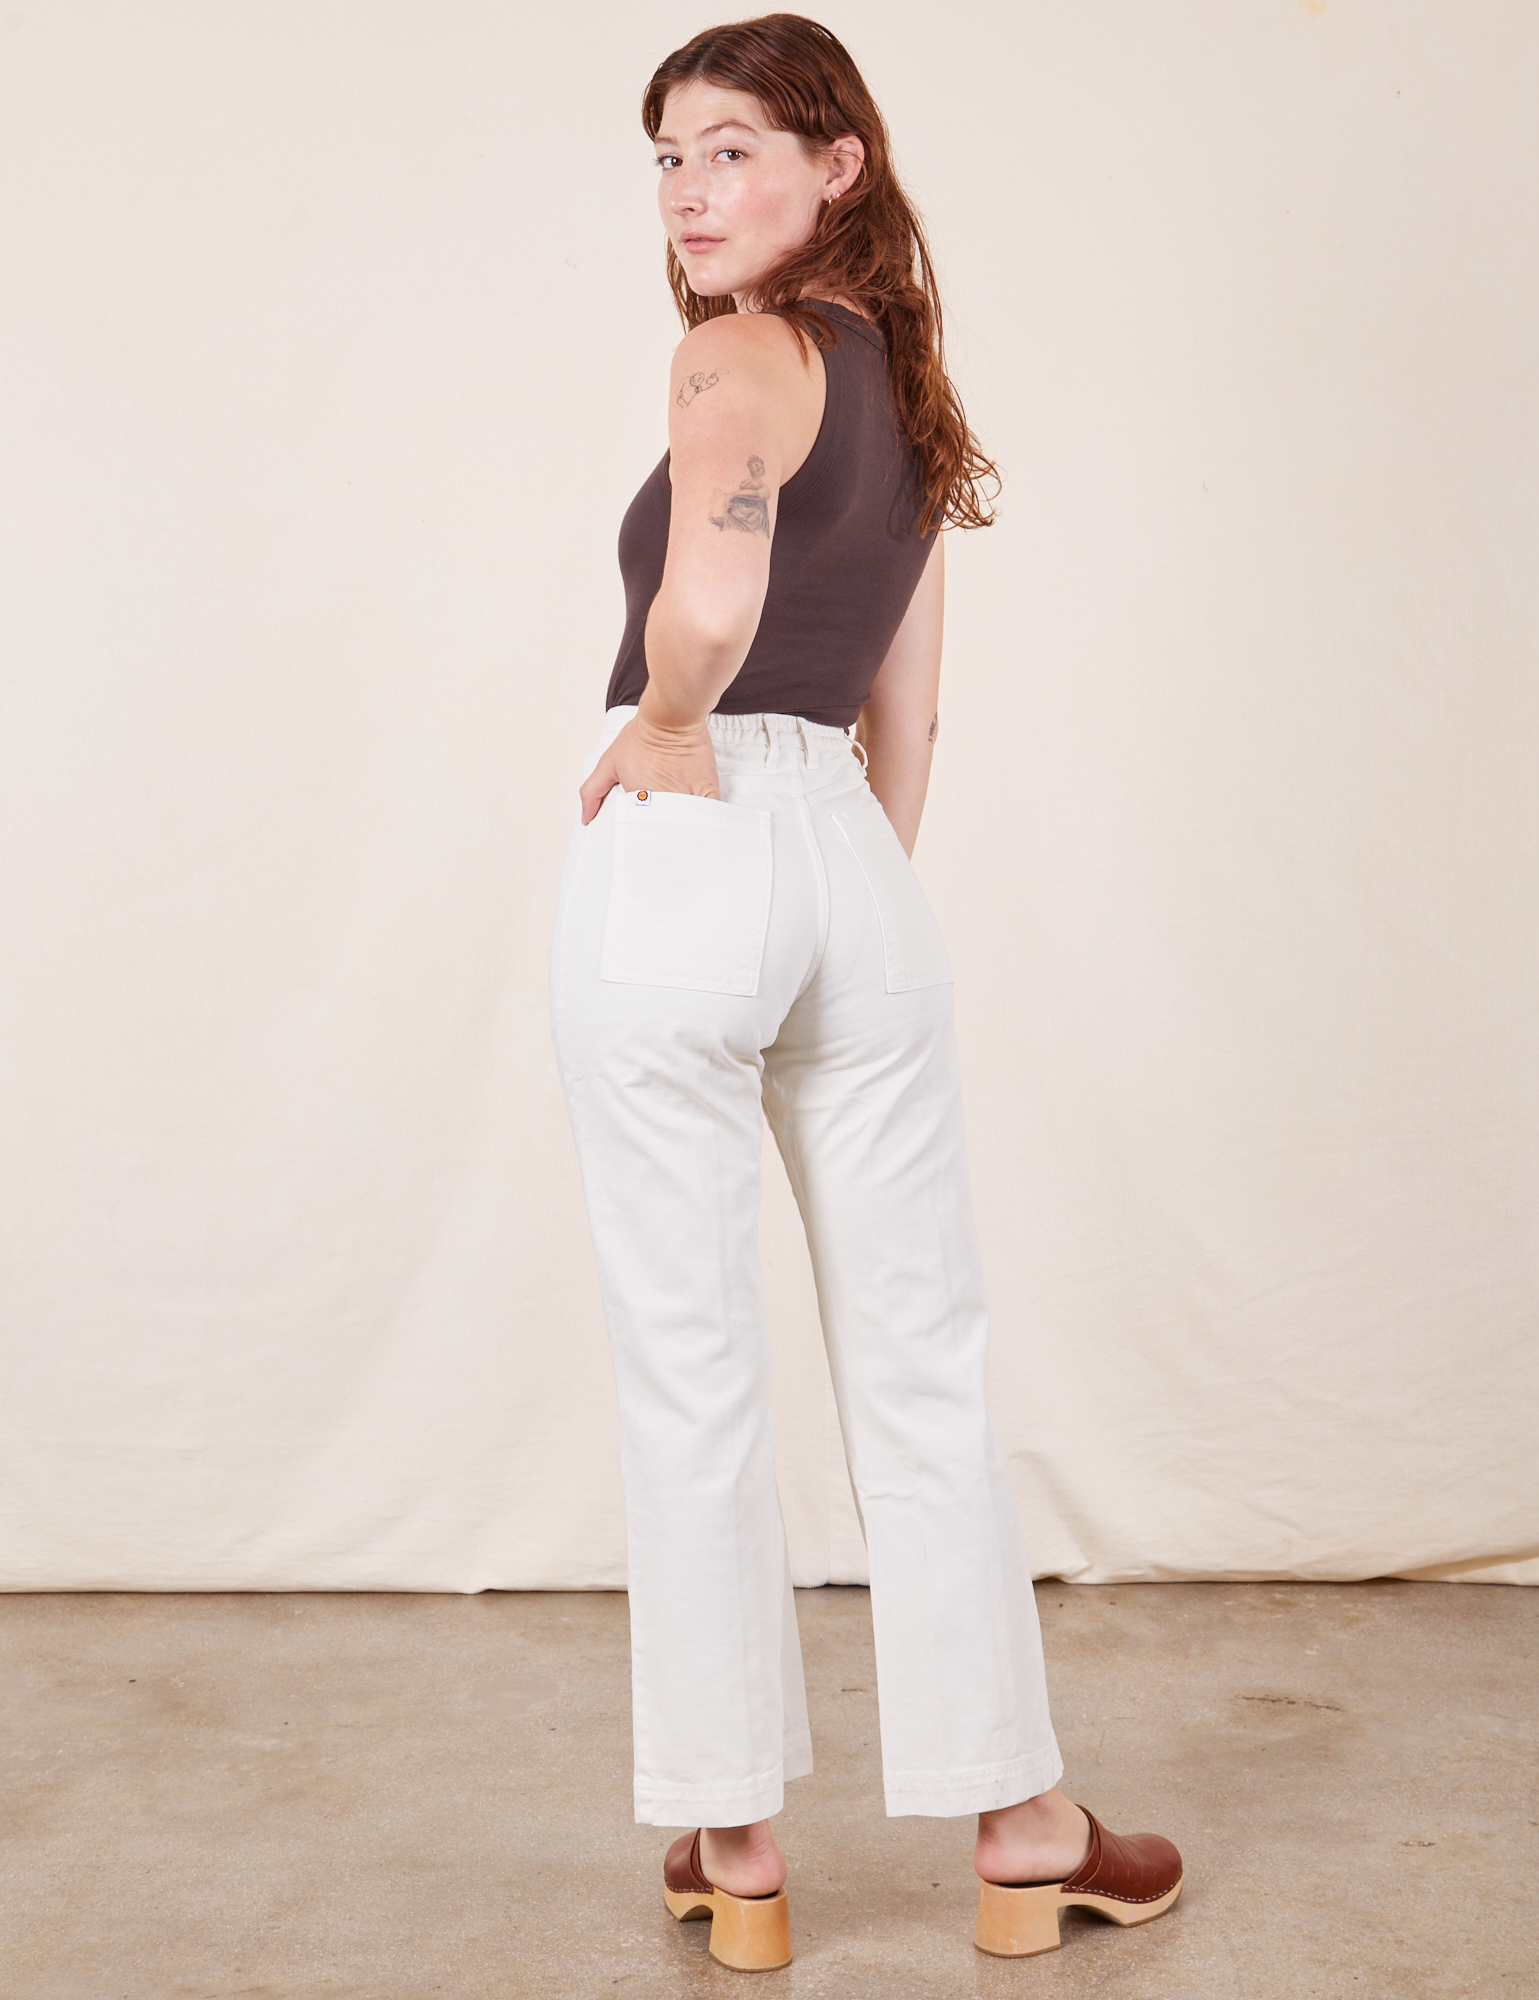 Back view of Western Pants in Vintage Tee Off-White and espresso brown Tank Top on Alex